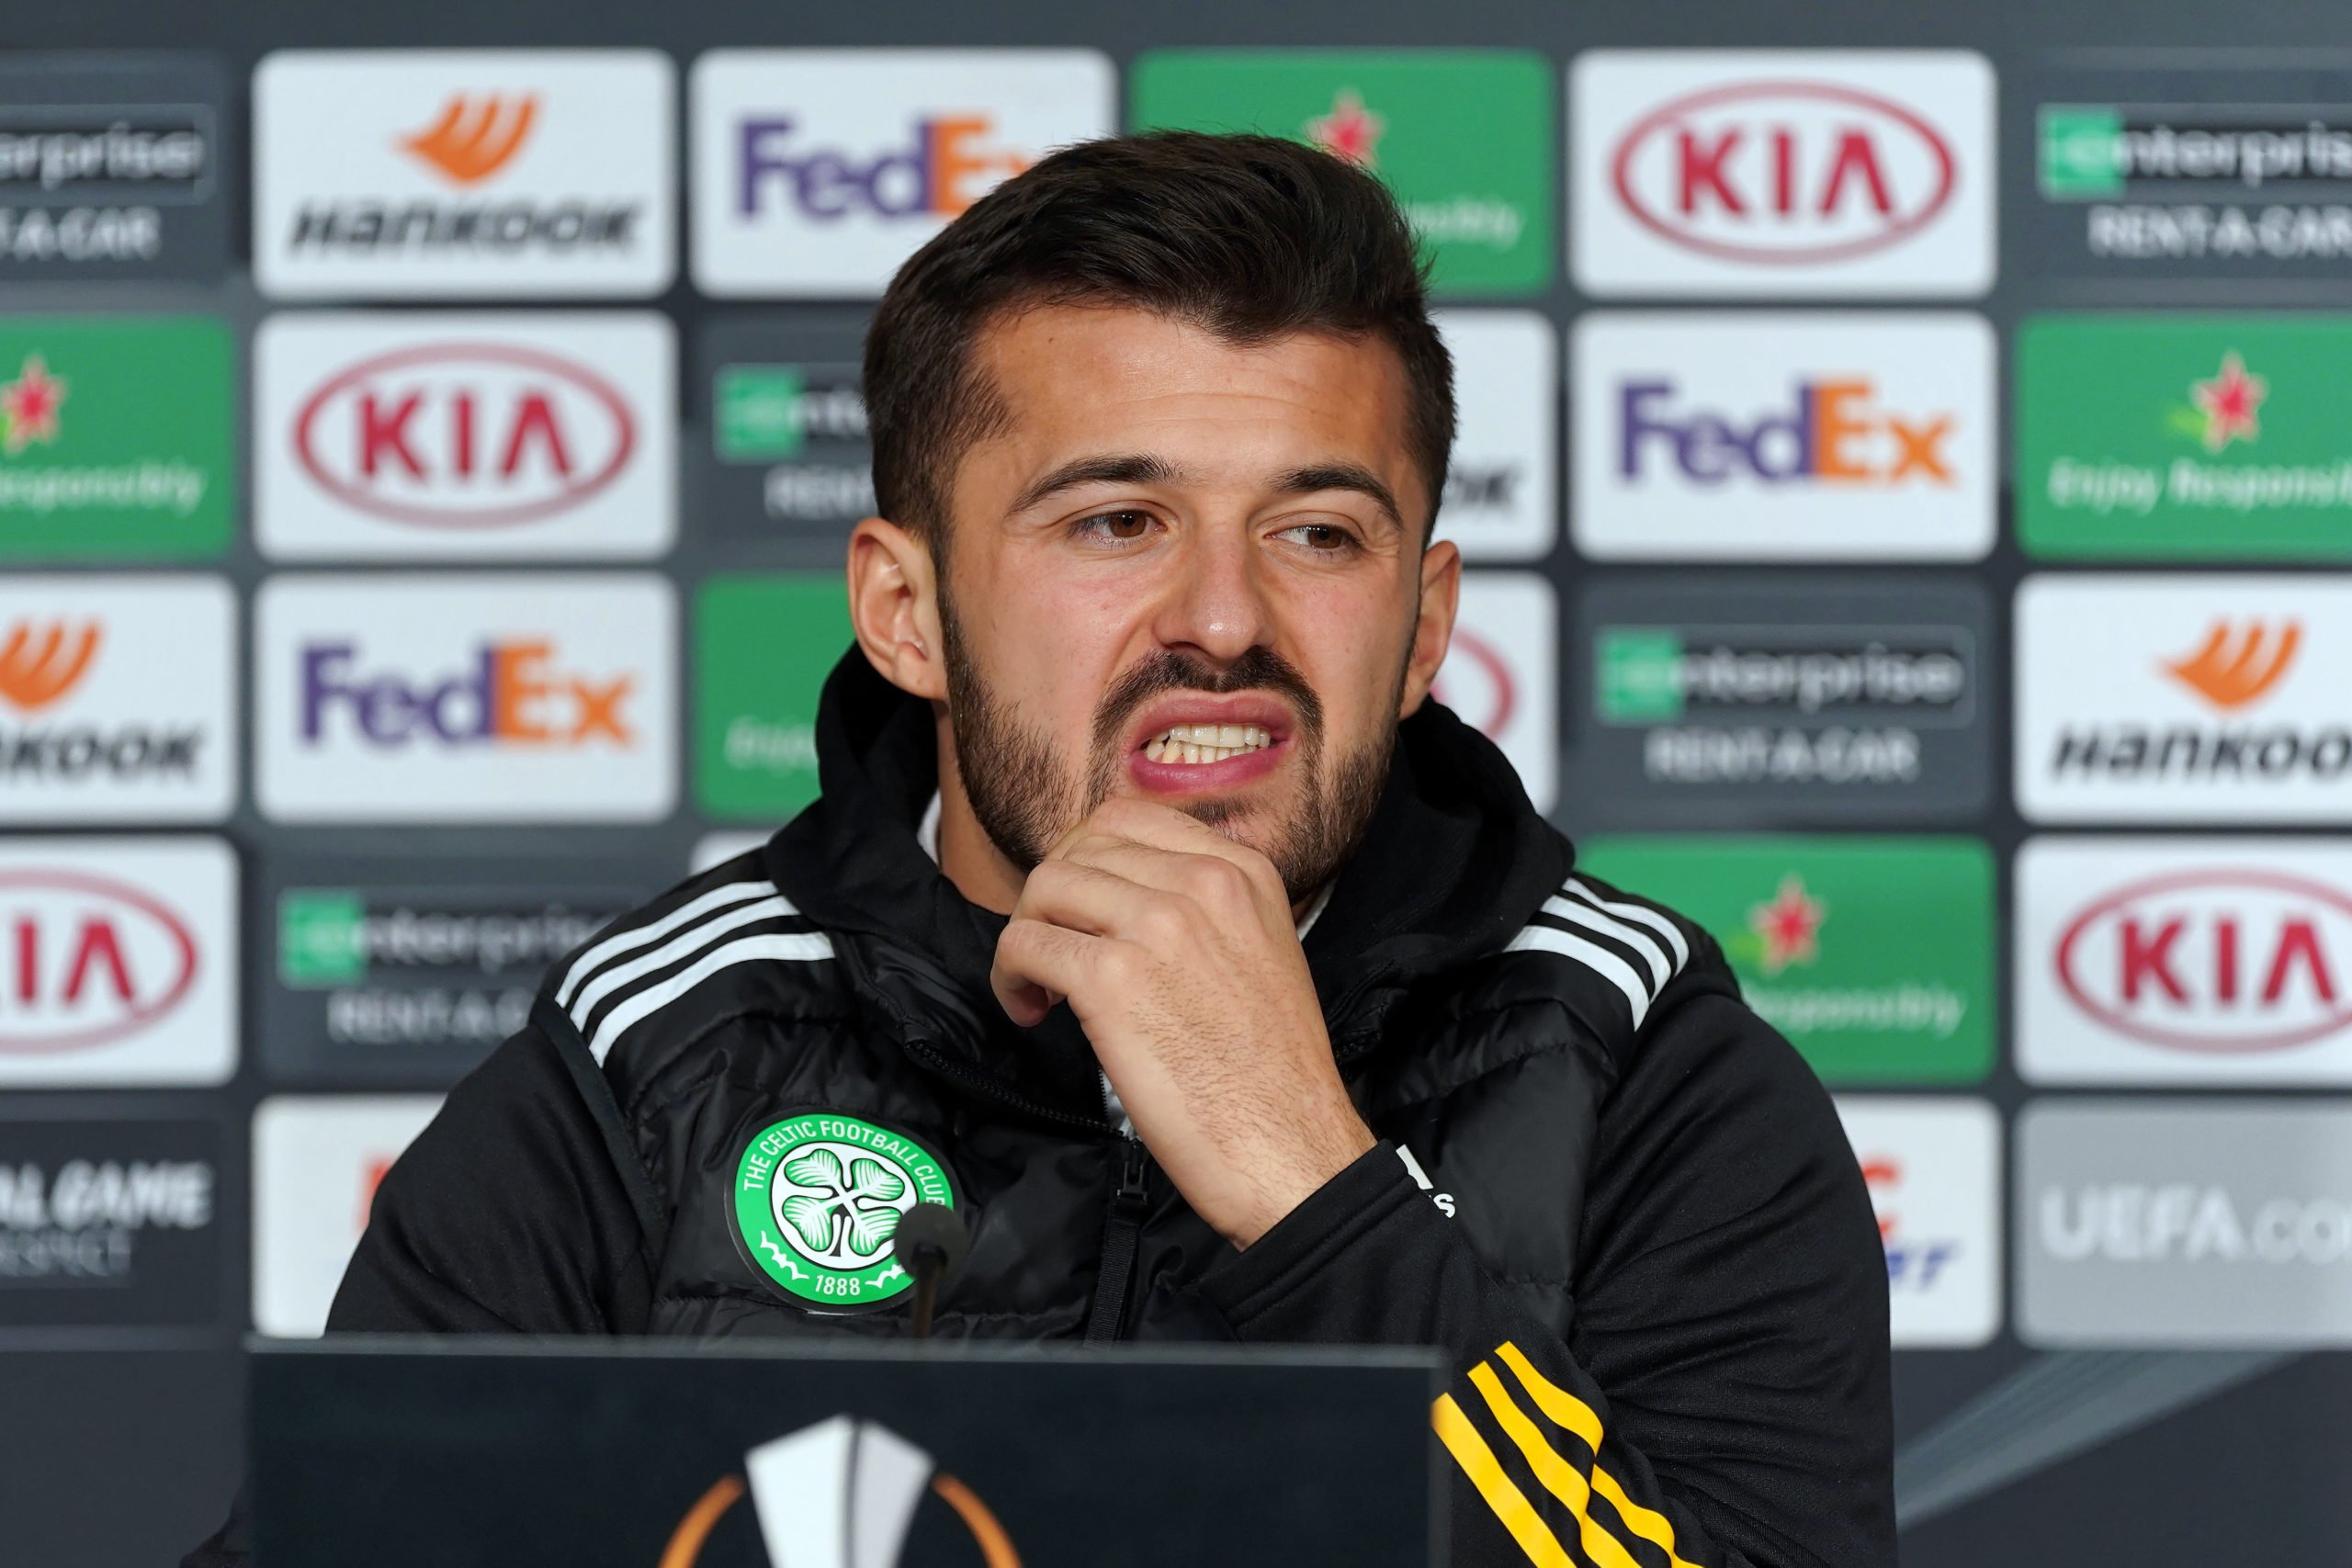 McAvennie claims that David Moyes didn't know who Celtic striker Albian Ajeti was